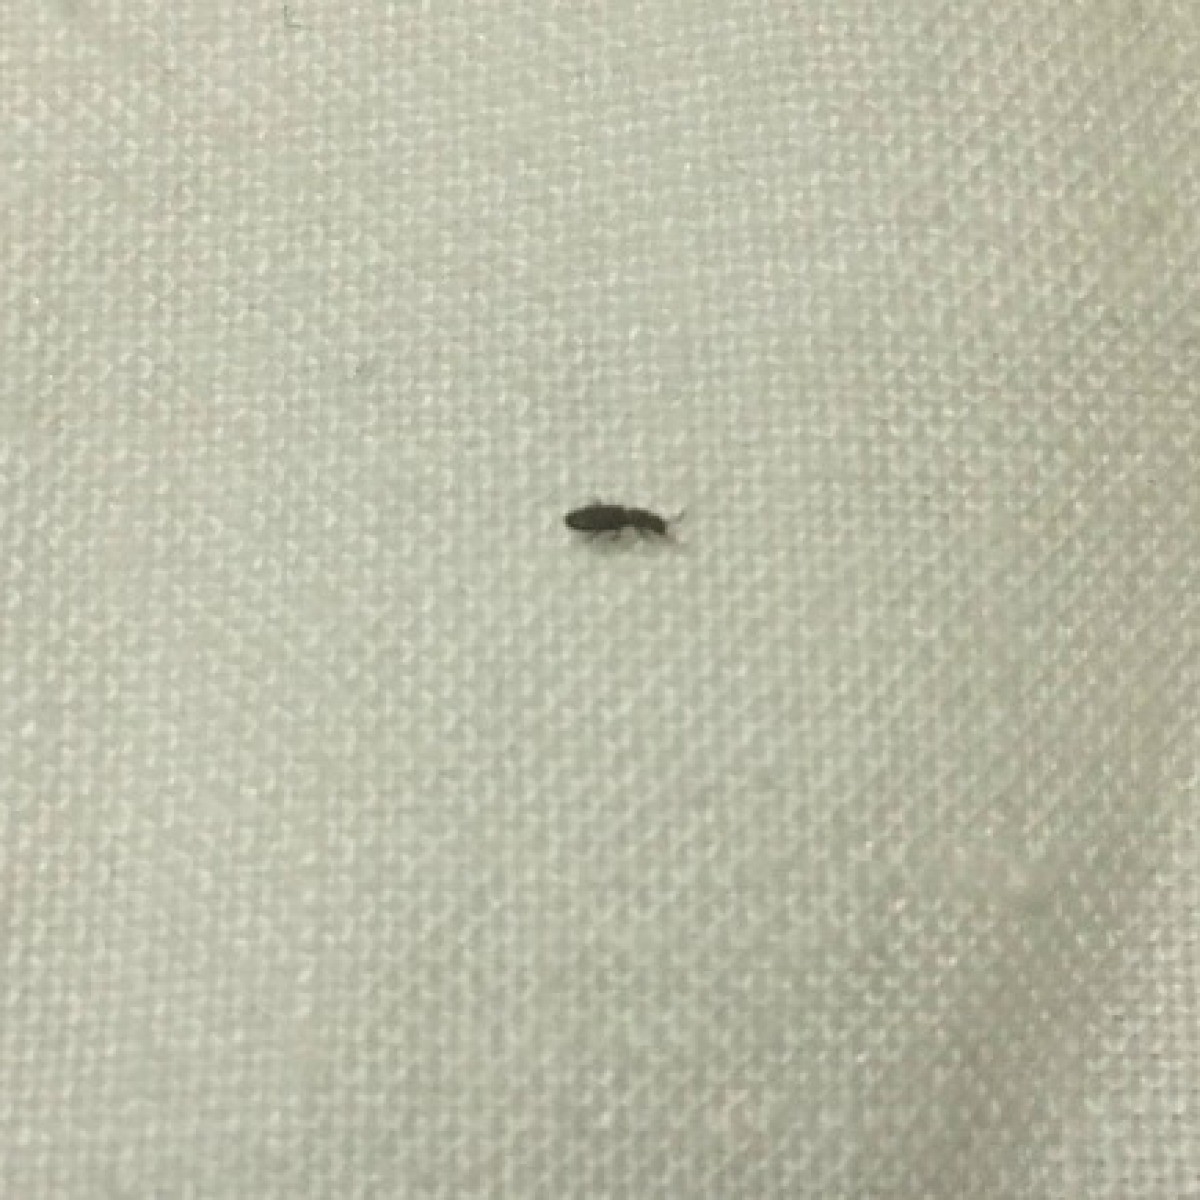 Identifying Tiny Black Insects Tx5 